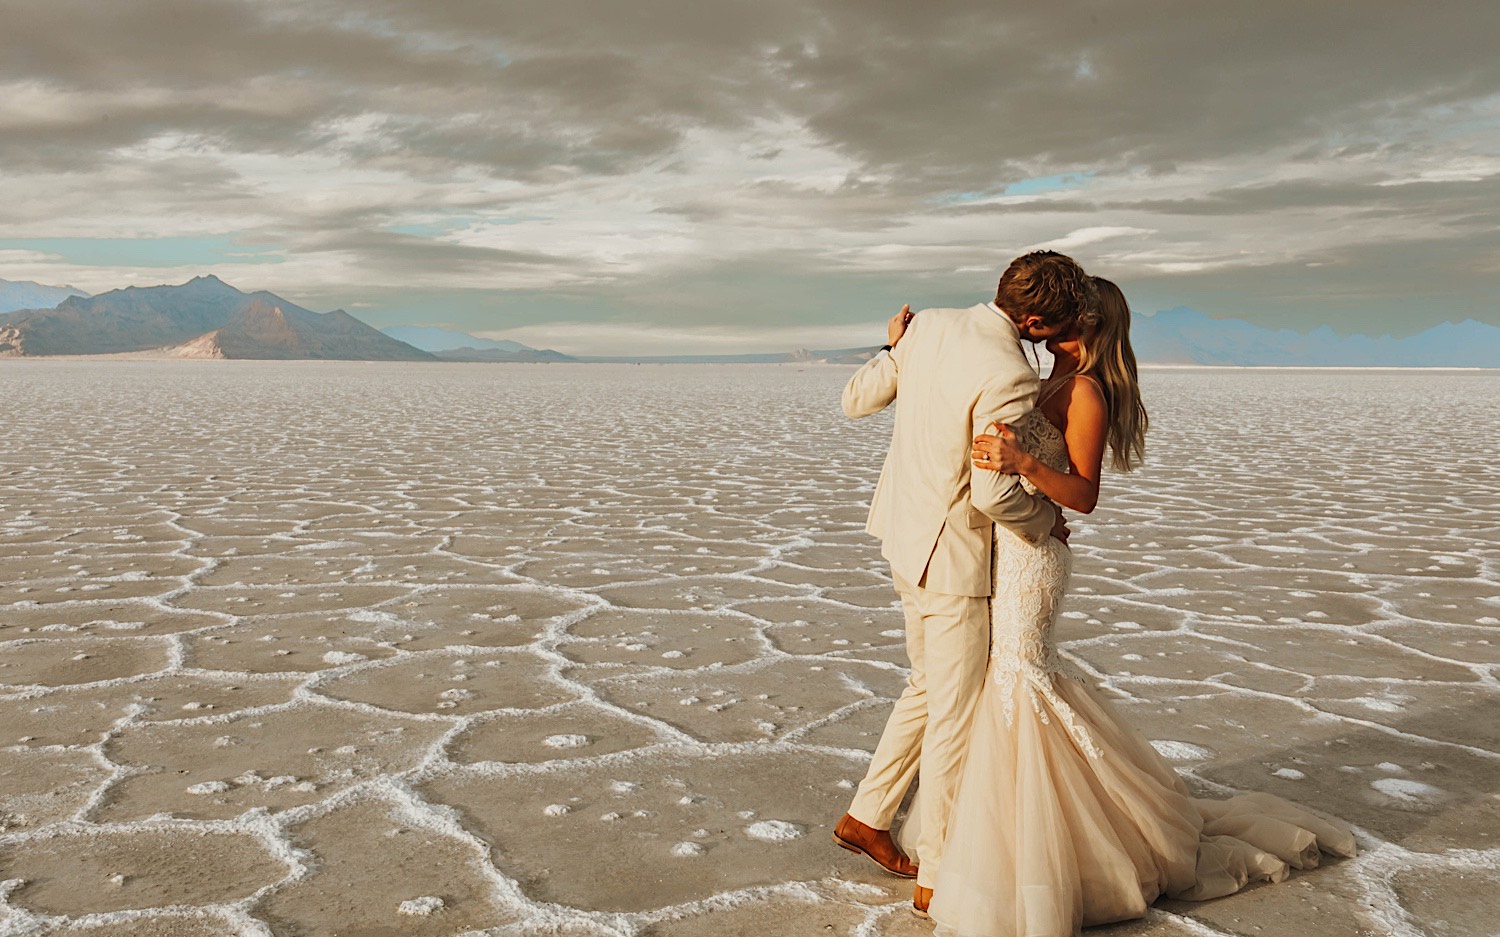 In the Utah Salt Flats a bride and groom kiss one another while dancing during their elopement day